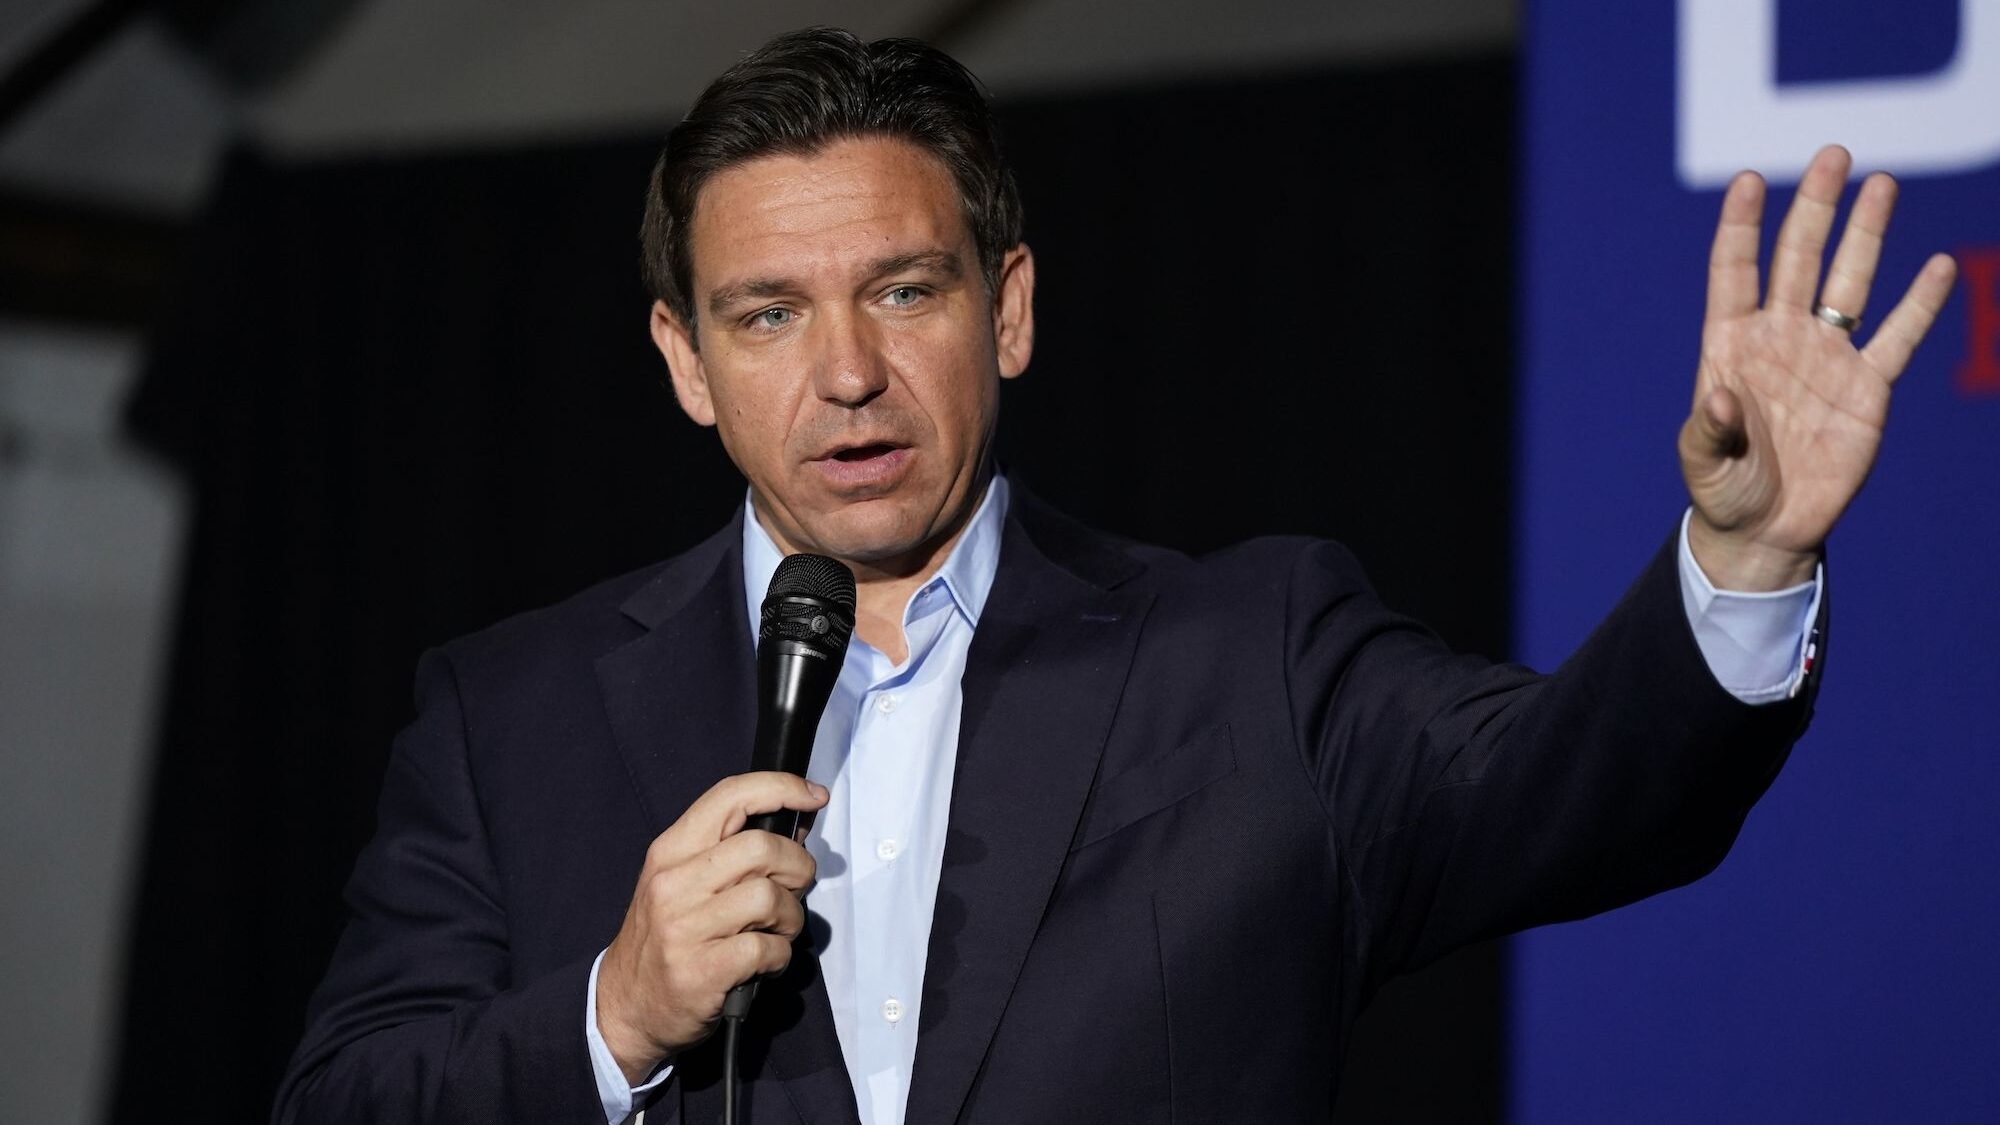 Florida Gov. Ron DeSantis, seen here on October 14, said Saturday that the US should not accept ref...